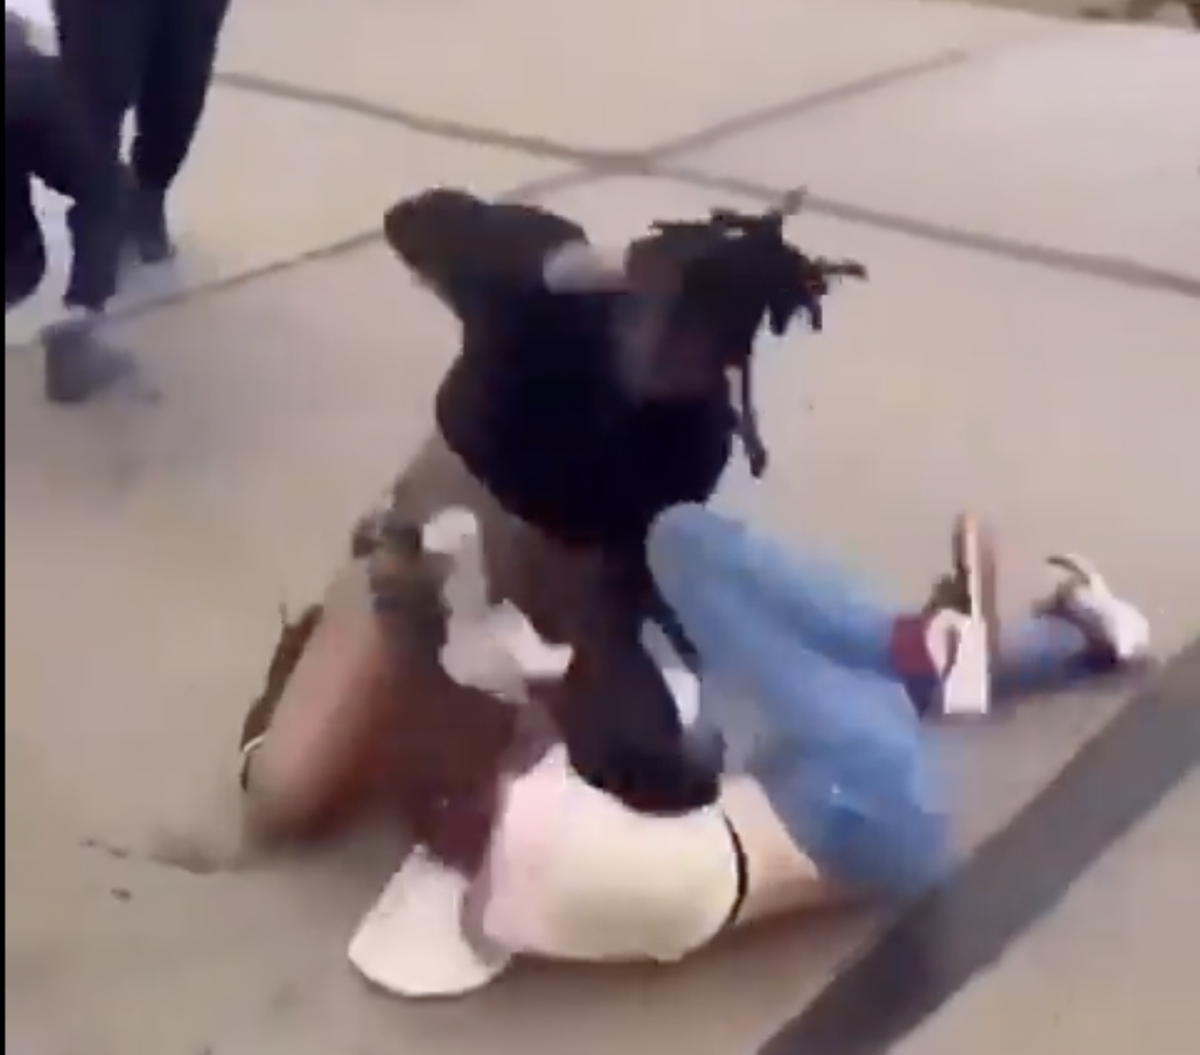 A video that went viral shows a 15-year-old beating another teen near Hazelwood East High School.